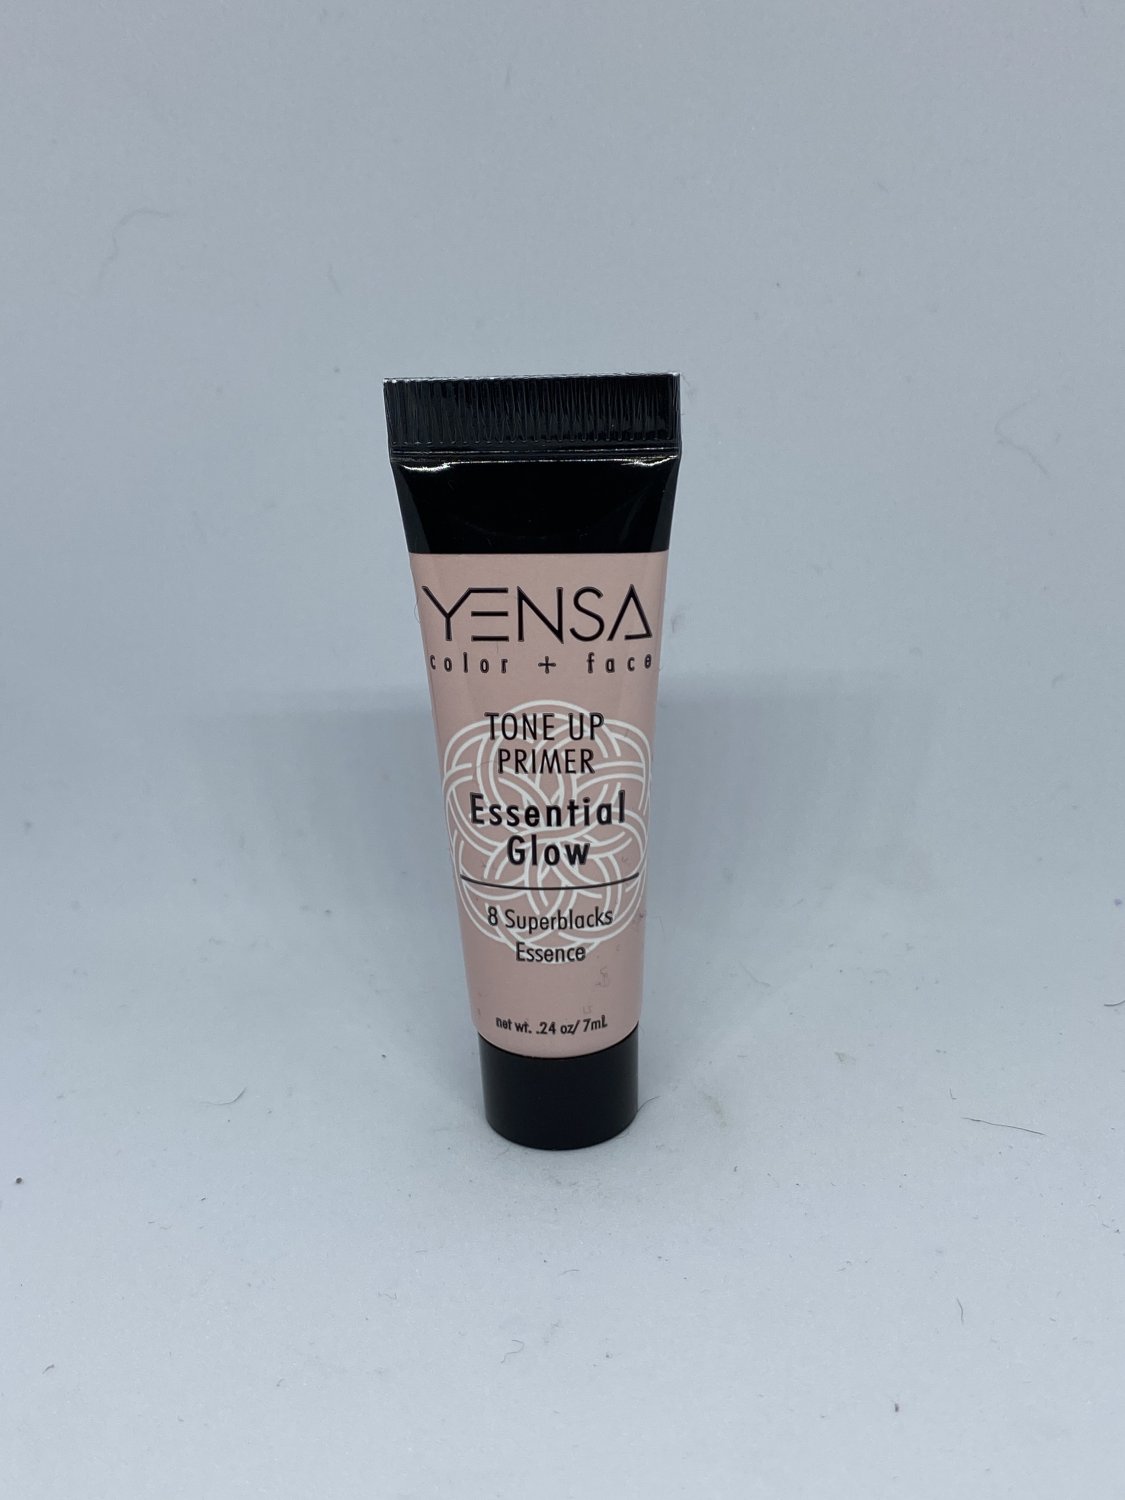 Yensa Tone Up Primer Essential Glow Trial Size Face